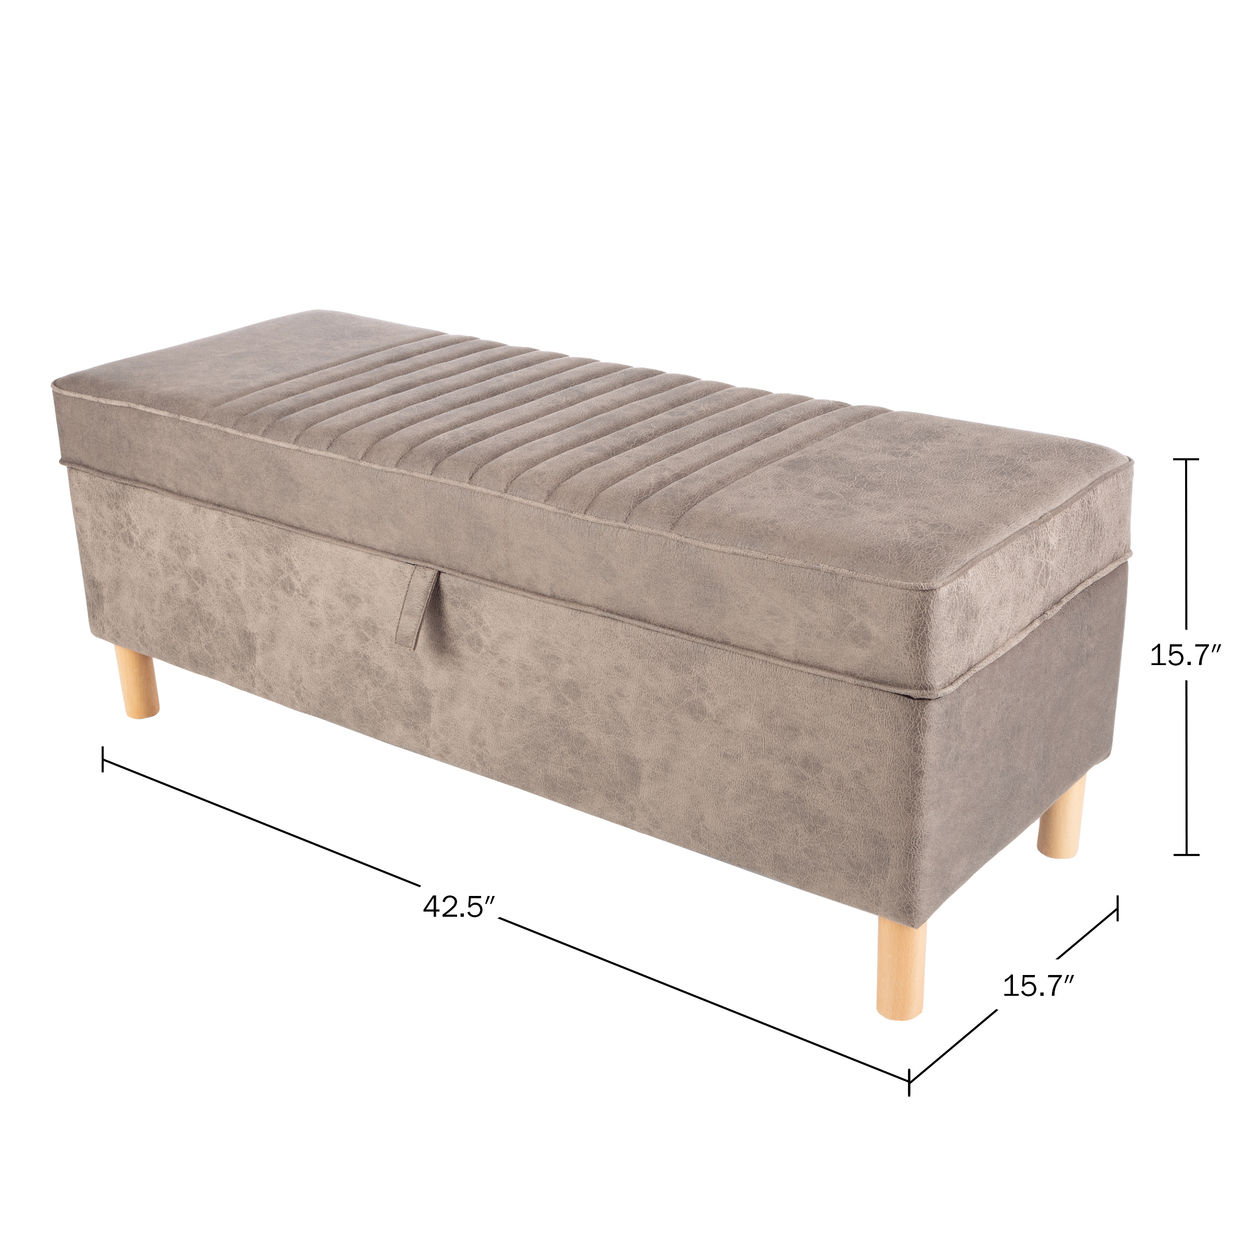 Lavish Home Storage Ottoman Footrest Suede Upholstered Linen Chest Bedroom 15.7 In Tall